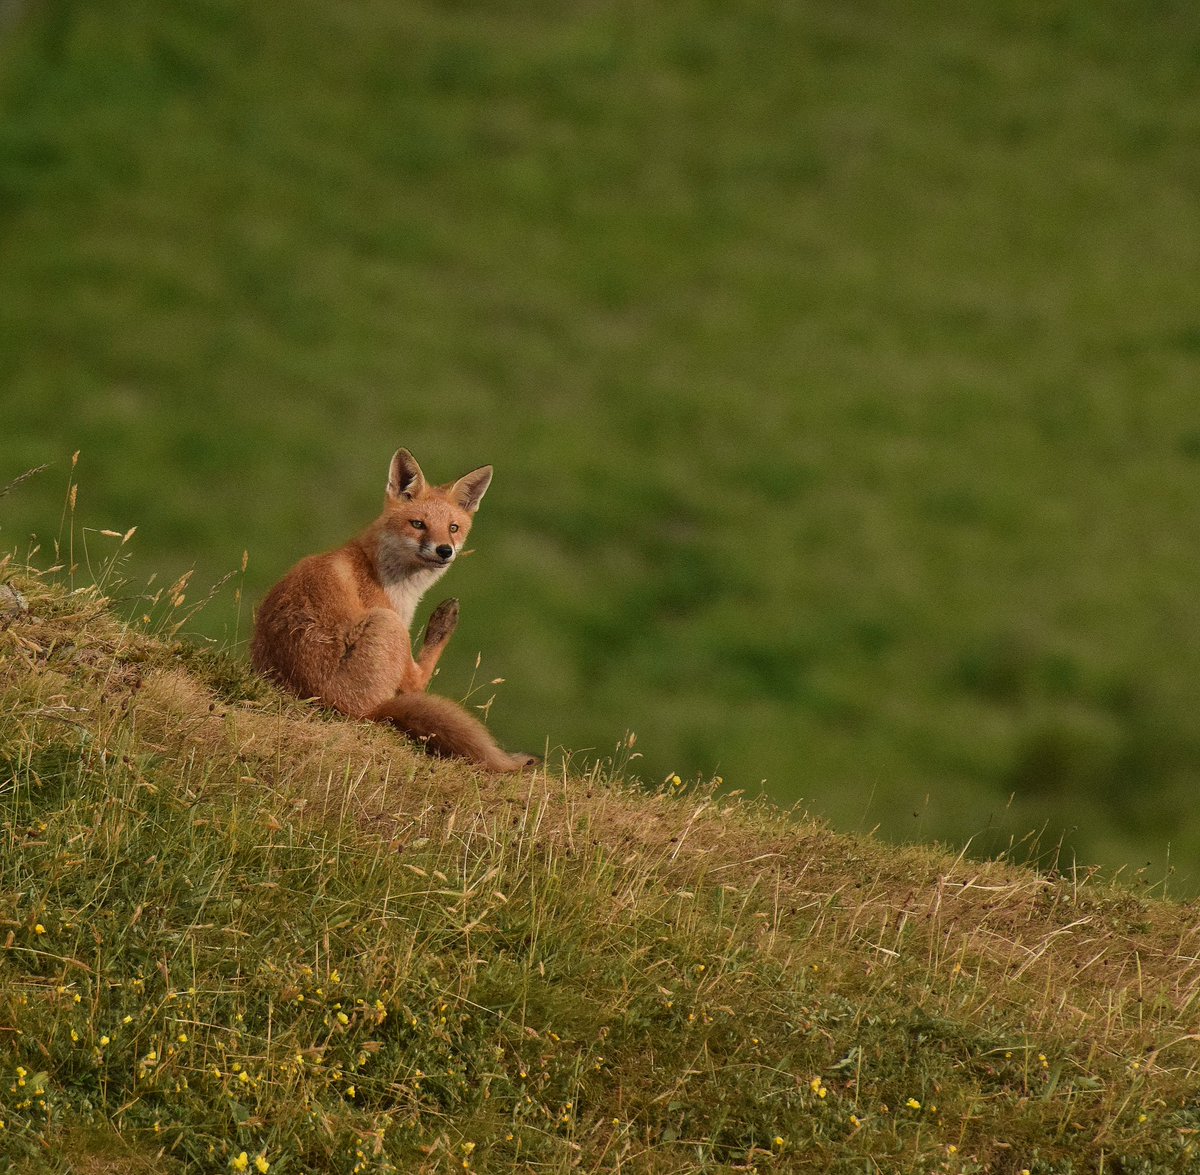 Young fox chilling in South Ayrshire. #FoxOfTheDay #ChrisPackham